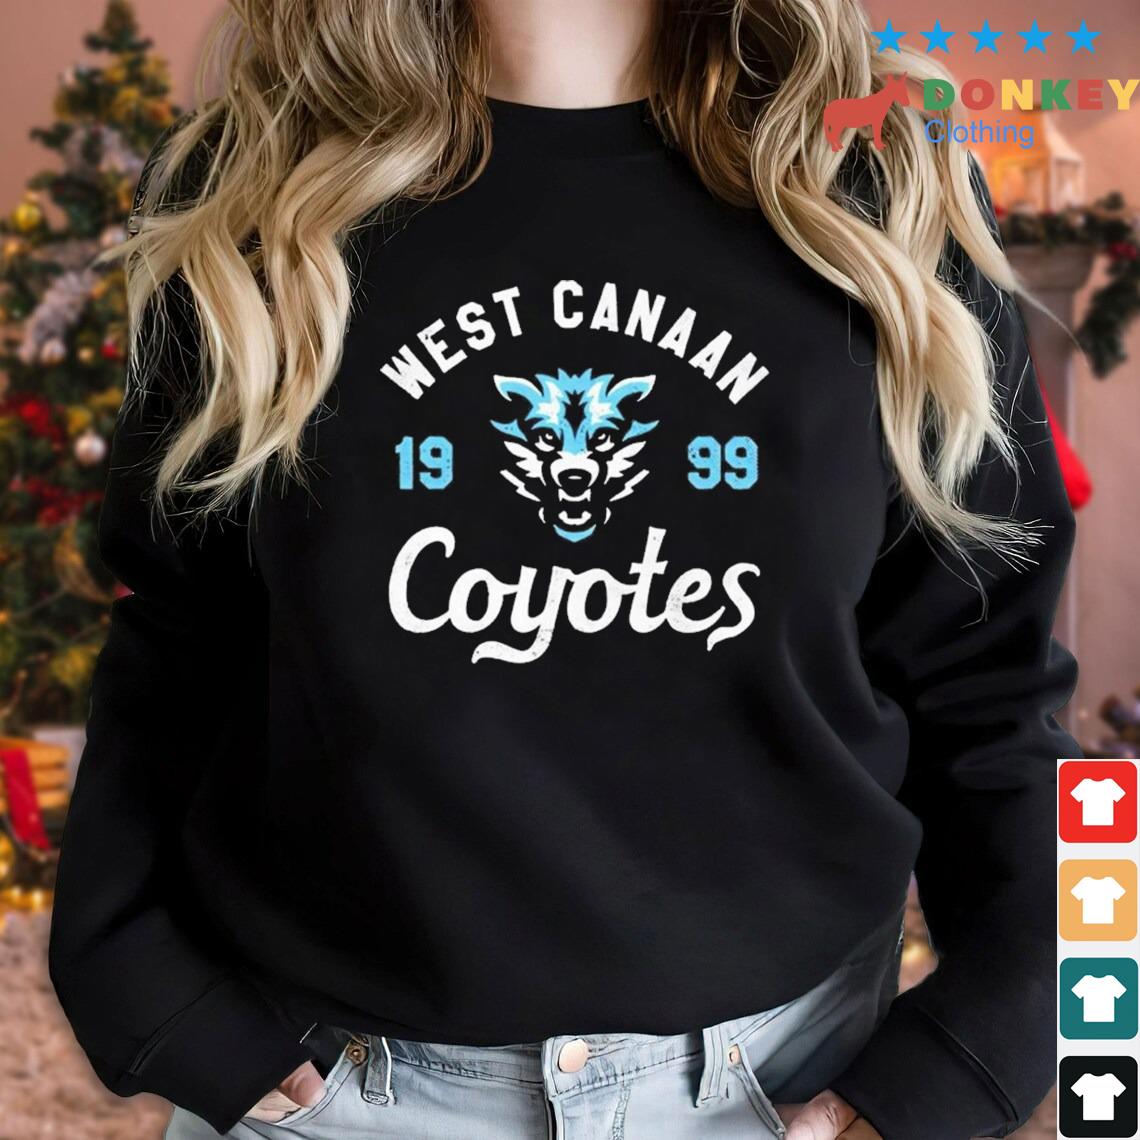 West Canaan Coyotes 1999 Shirt